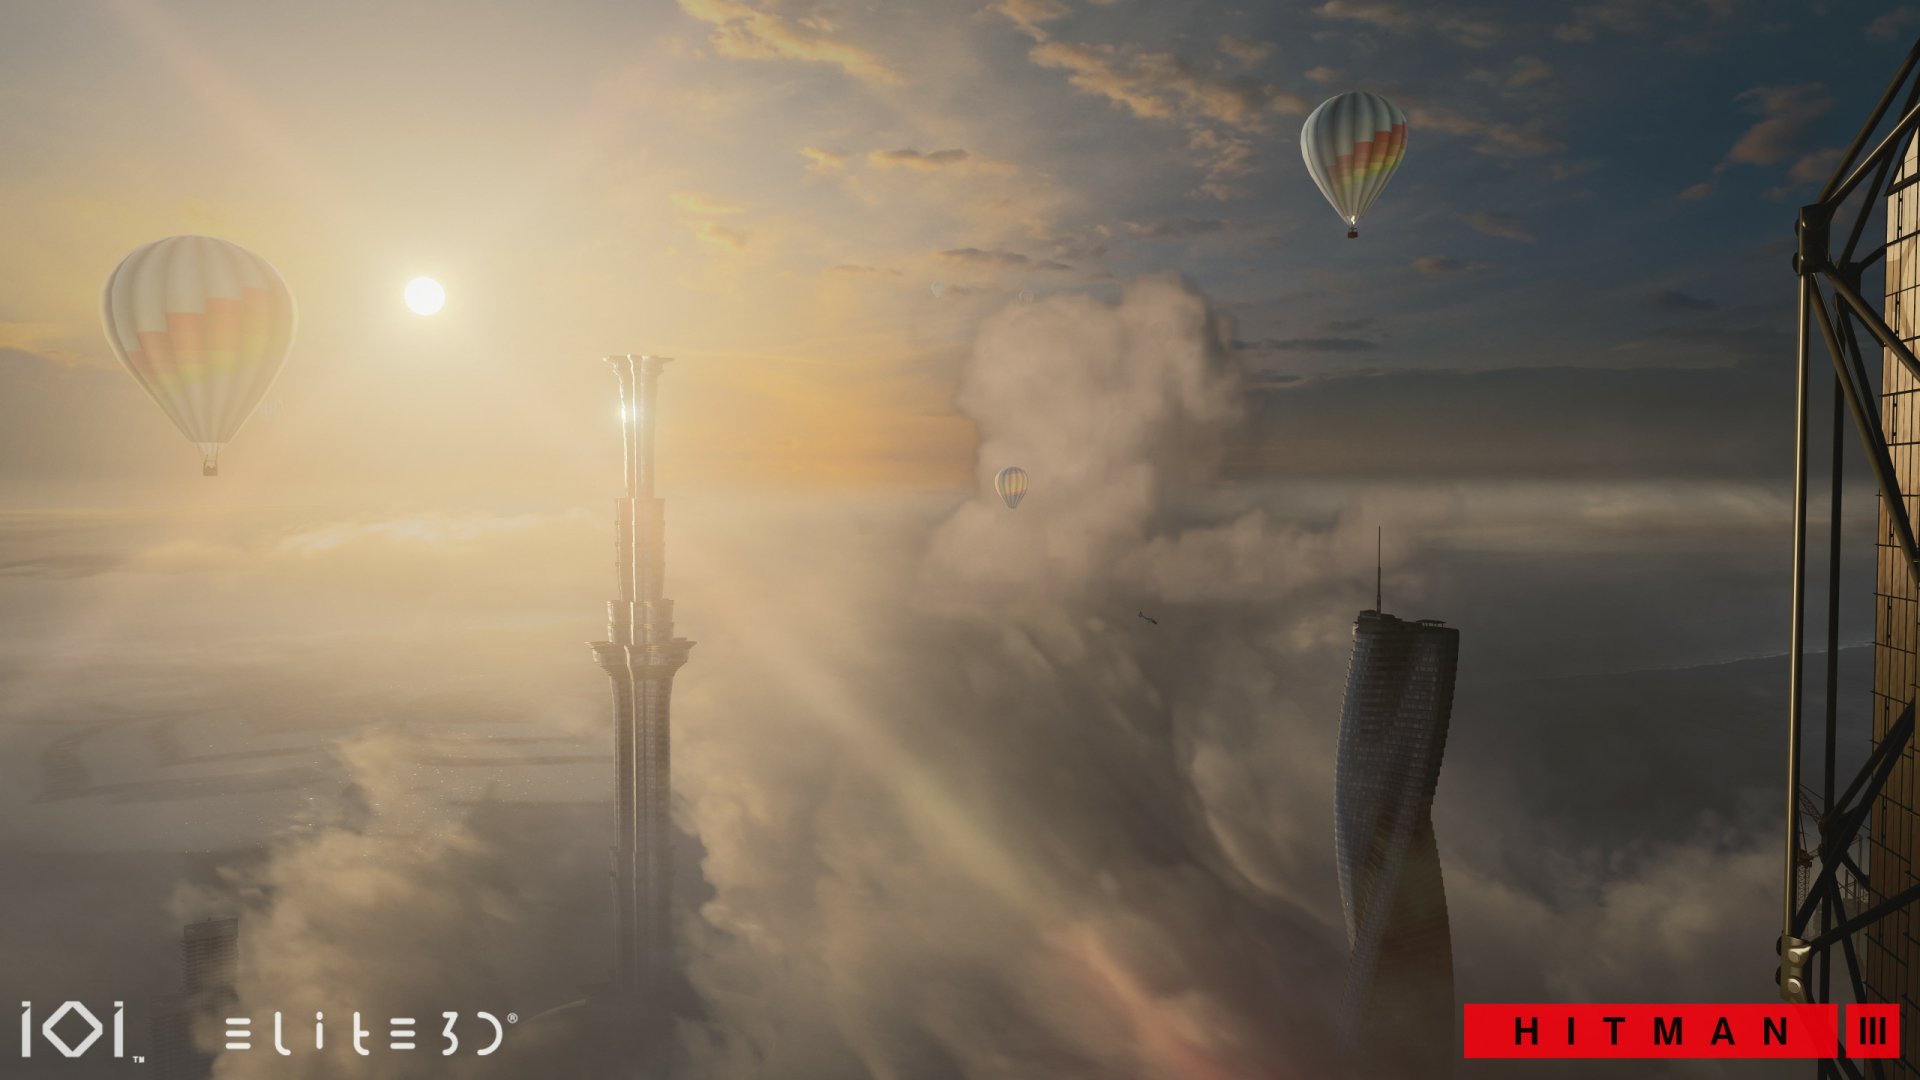 Stunning HD desktop wallpaper for Hitman 3 featuring hot air balloons soaring above the clouds at sunrise.